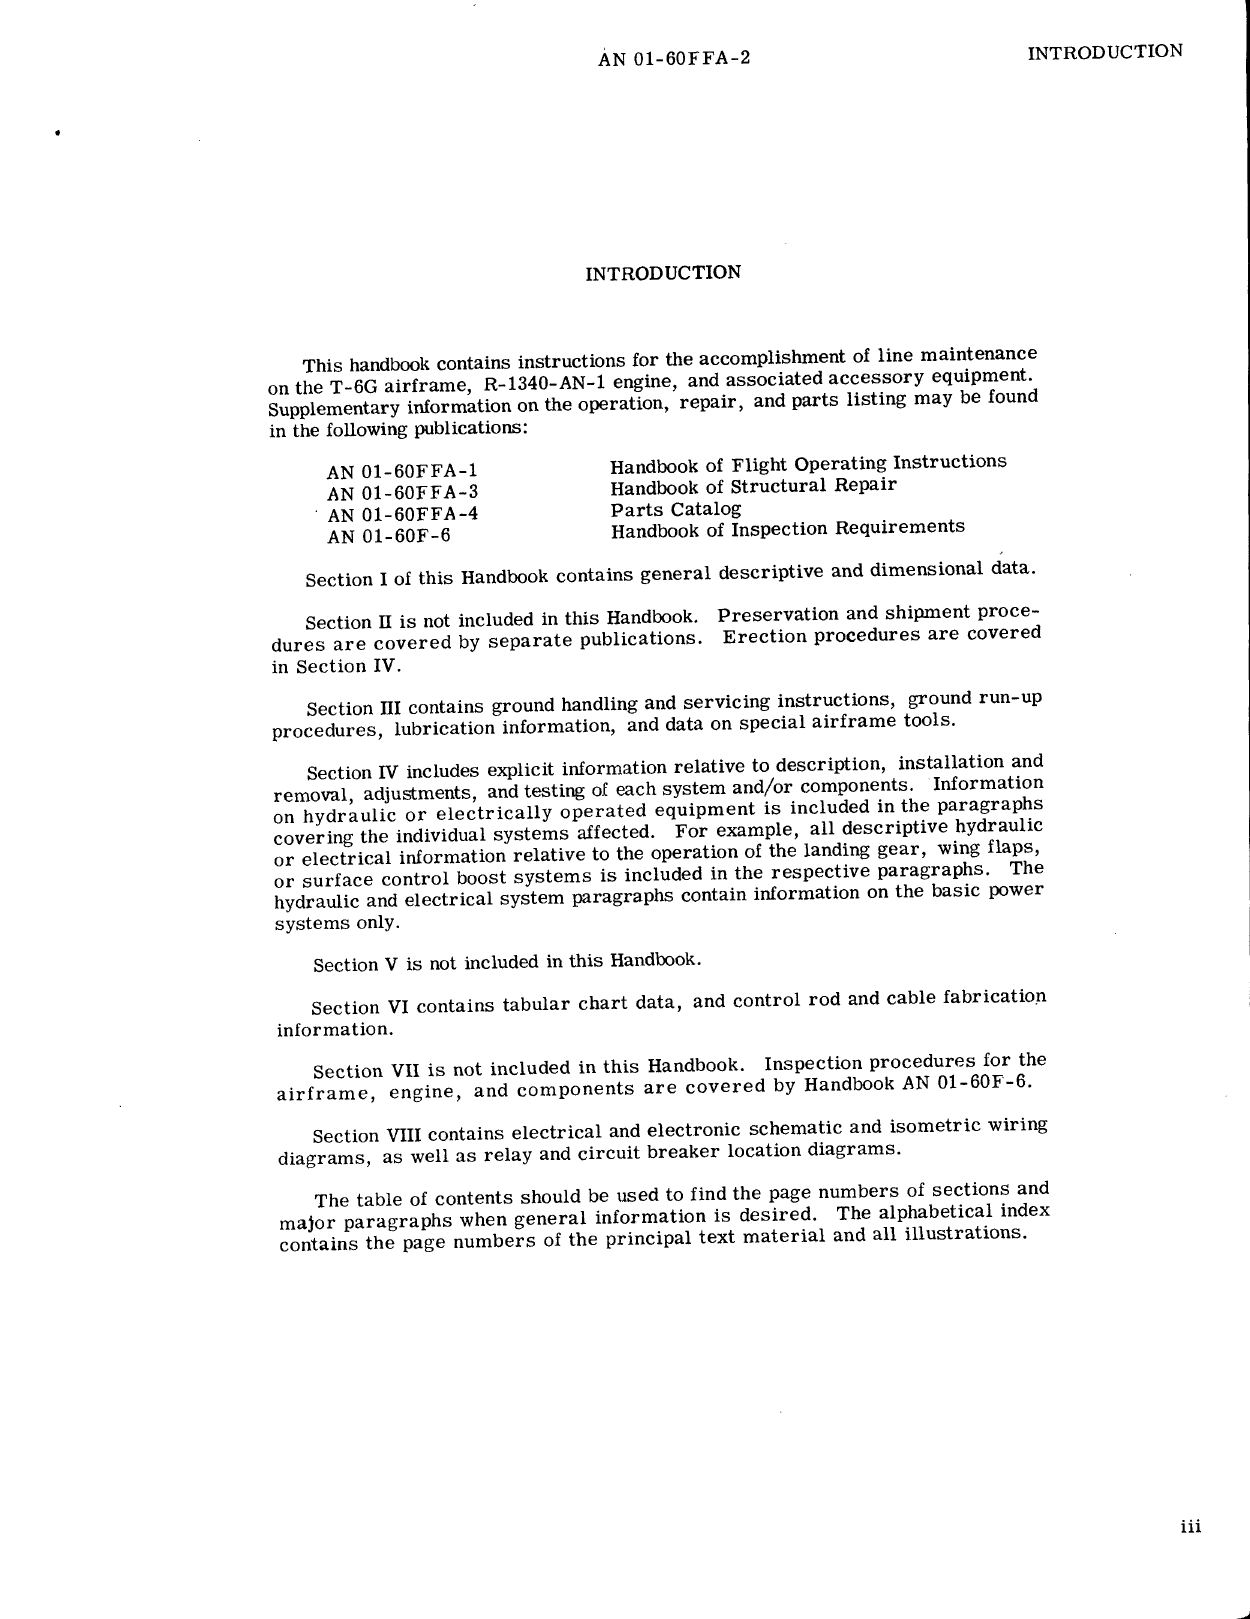 Sample page 6 from AirCorps Library document: Maintenance Instructions for T-6G and LT-6G Aircraft